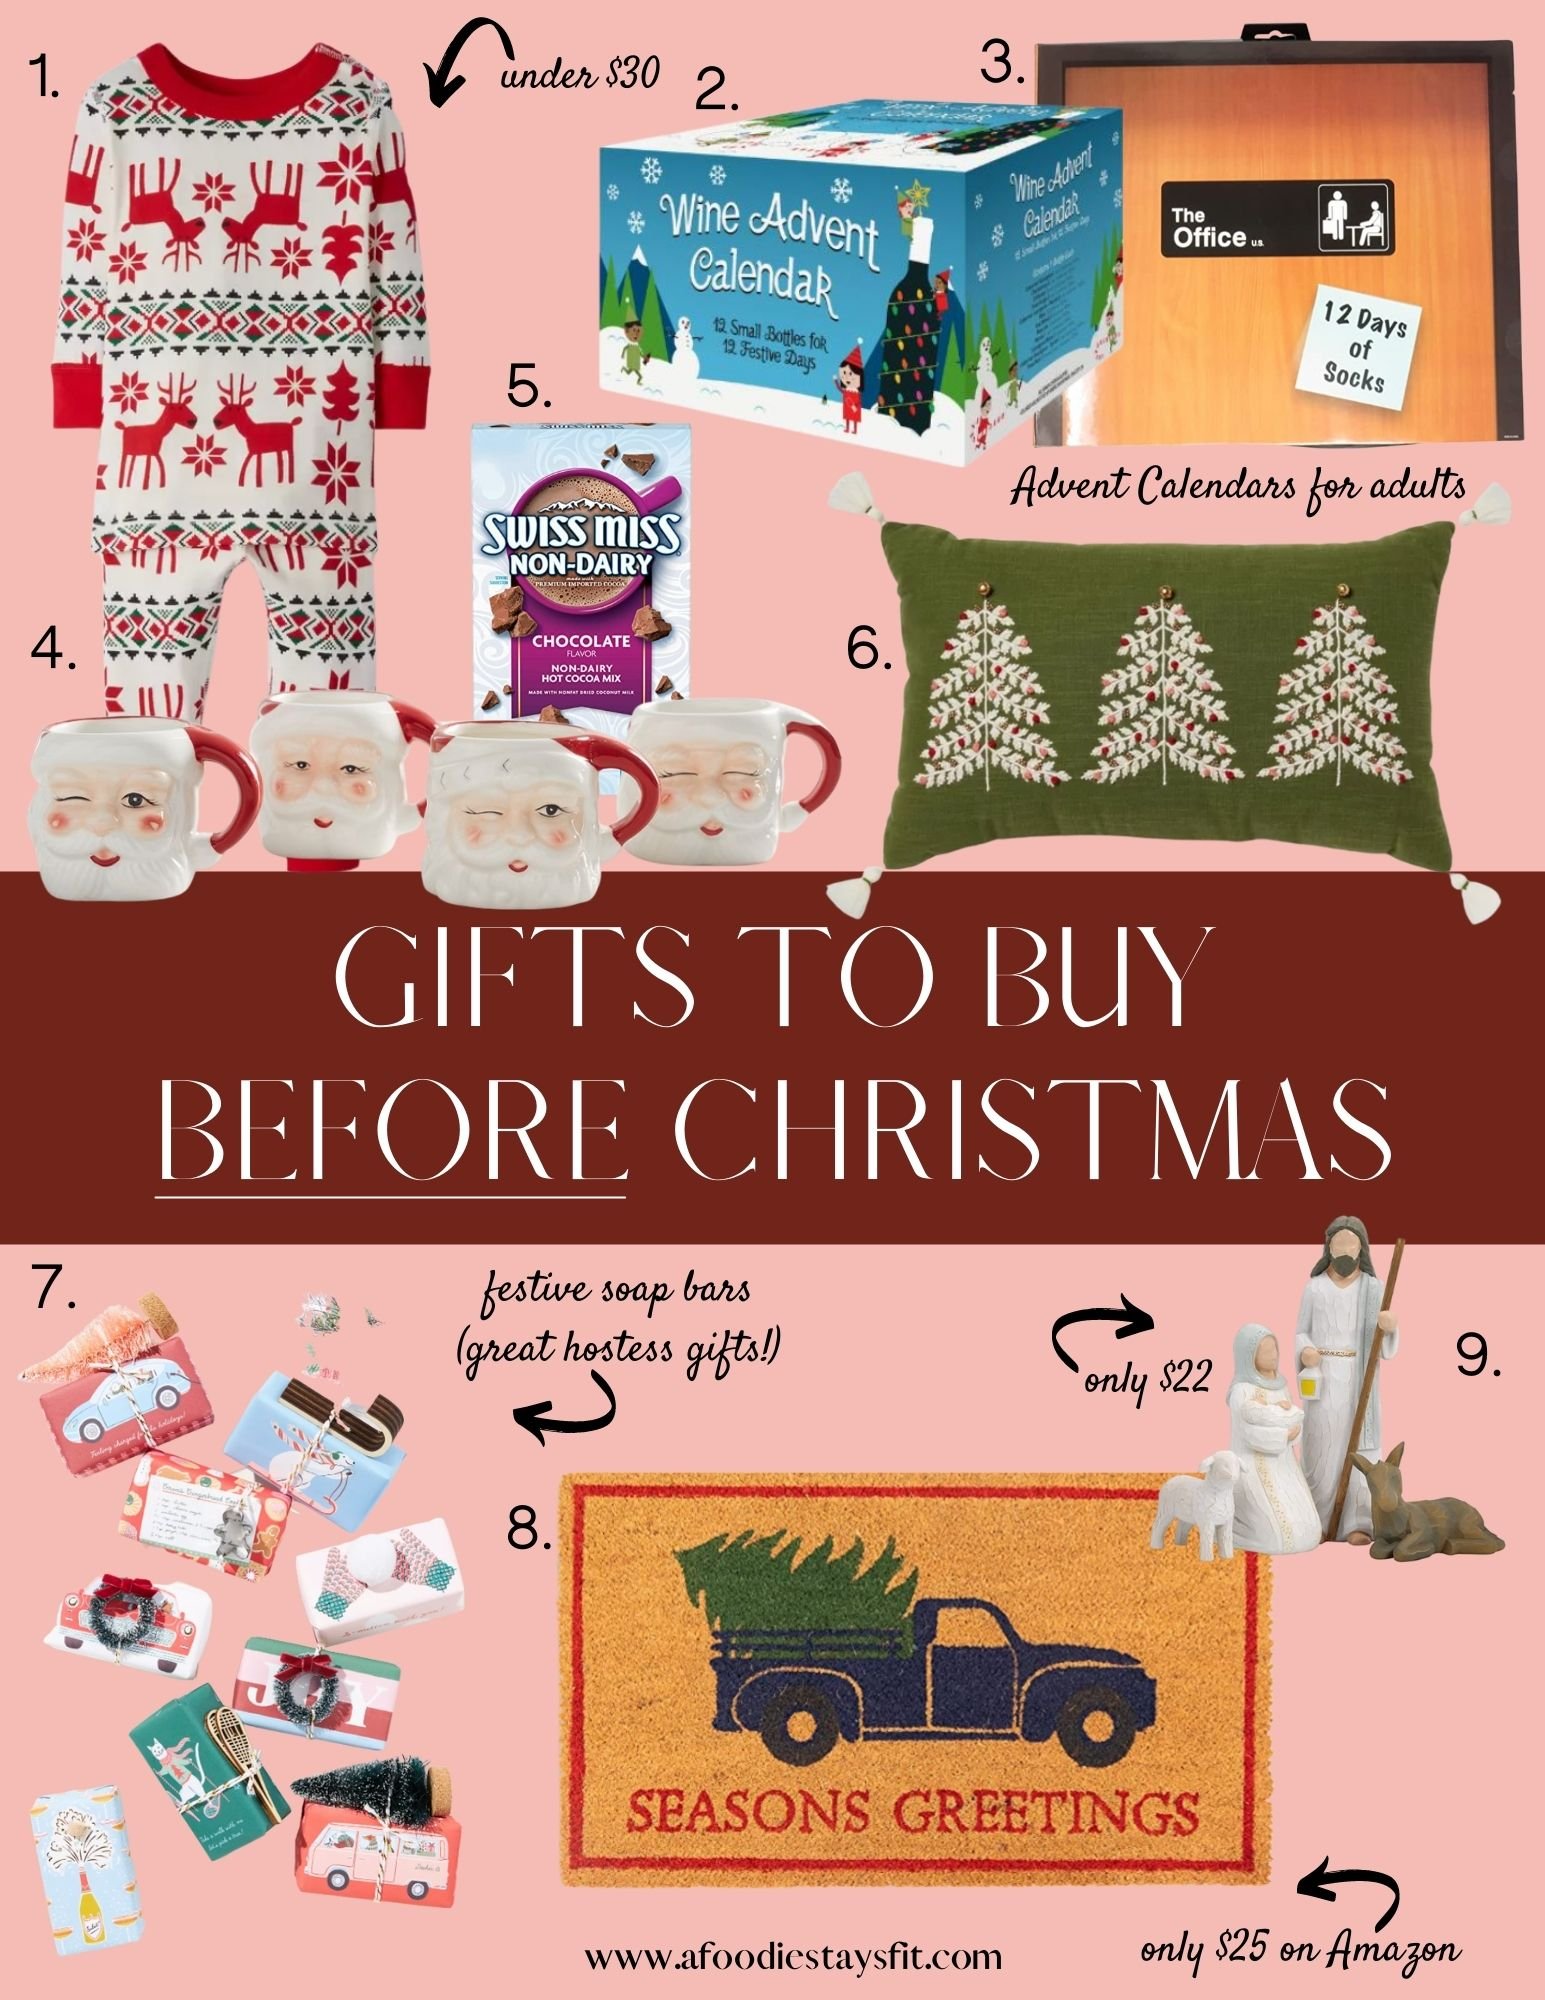 Gifts to Buy Before Christmas